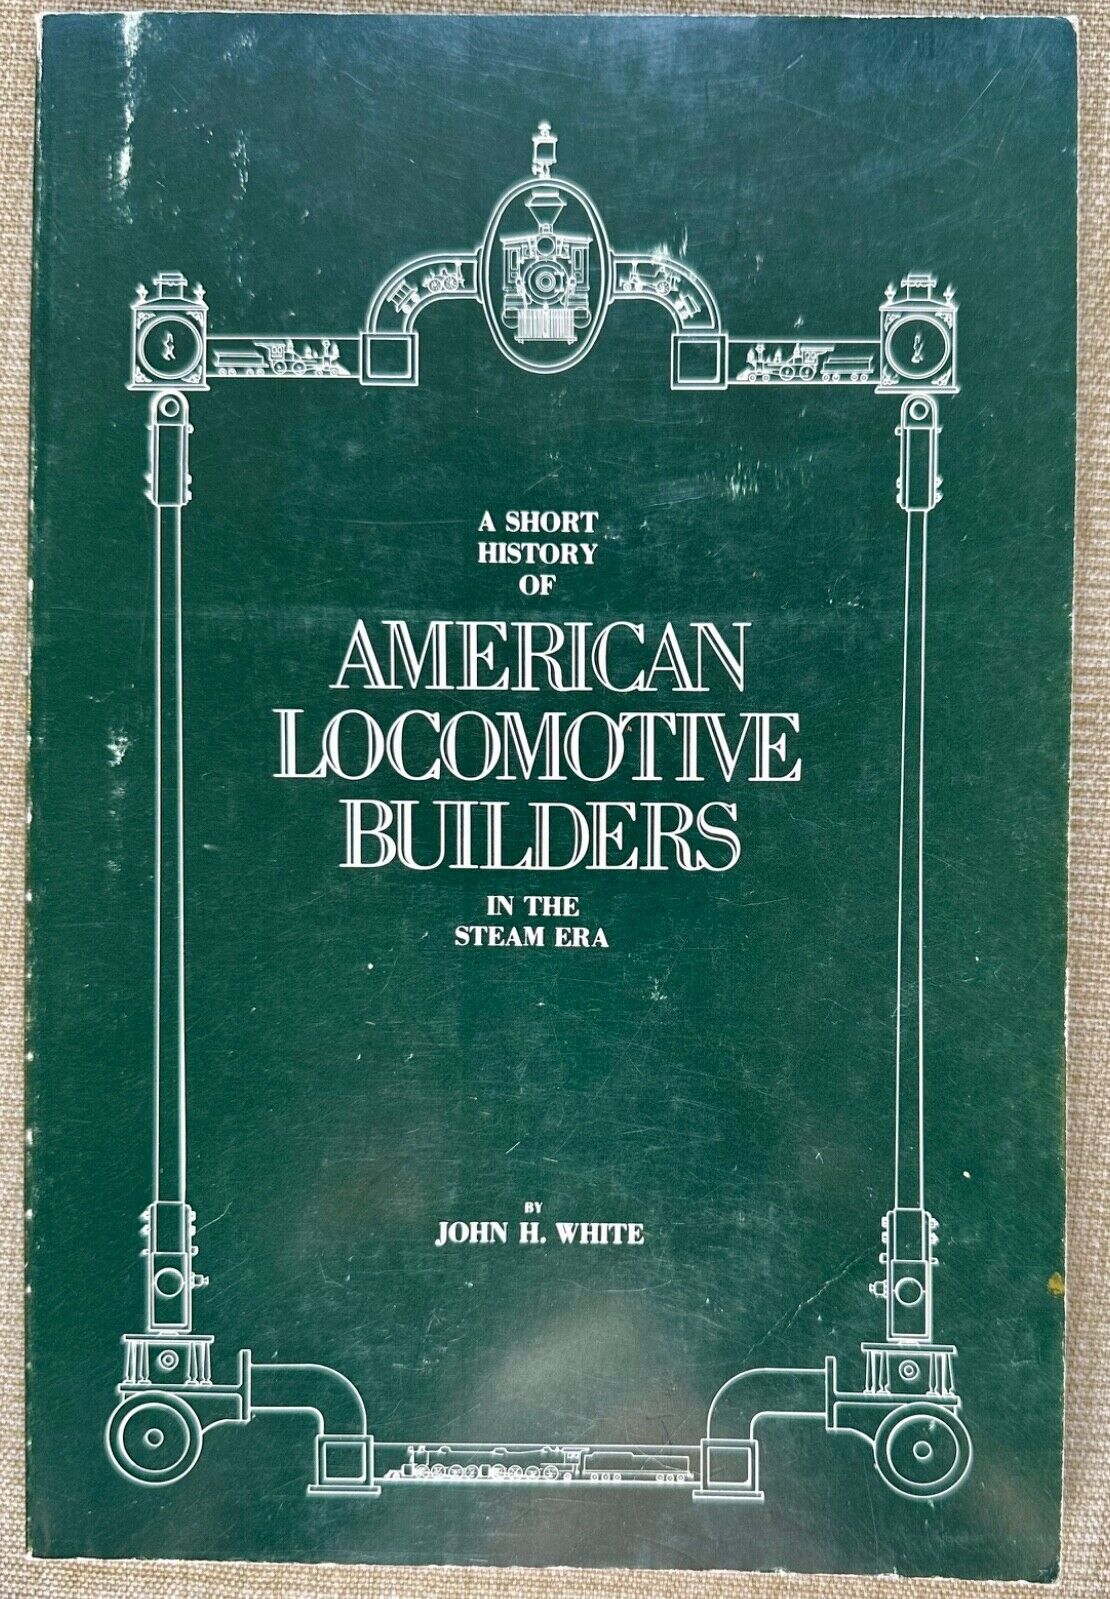 A Short History of American Locomotive Builders in the Steam Era - John H White